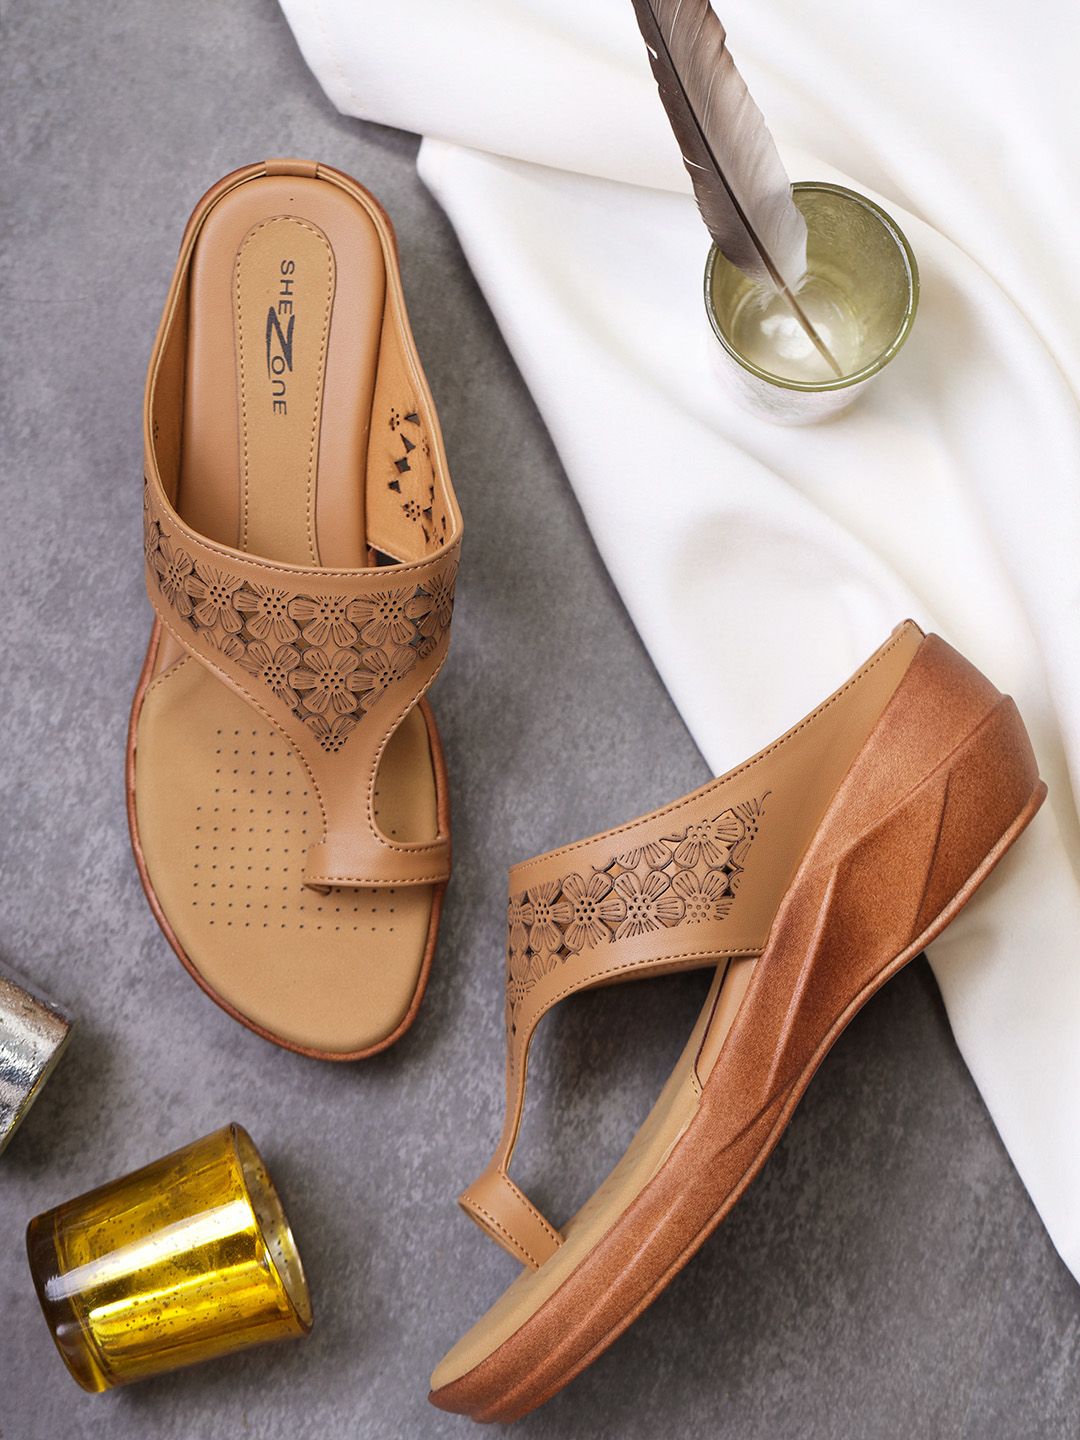 Shezone Beige Slim Heeled Sandals with Laser Cuts Price in India